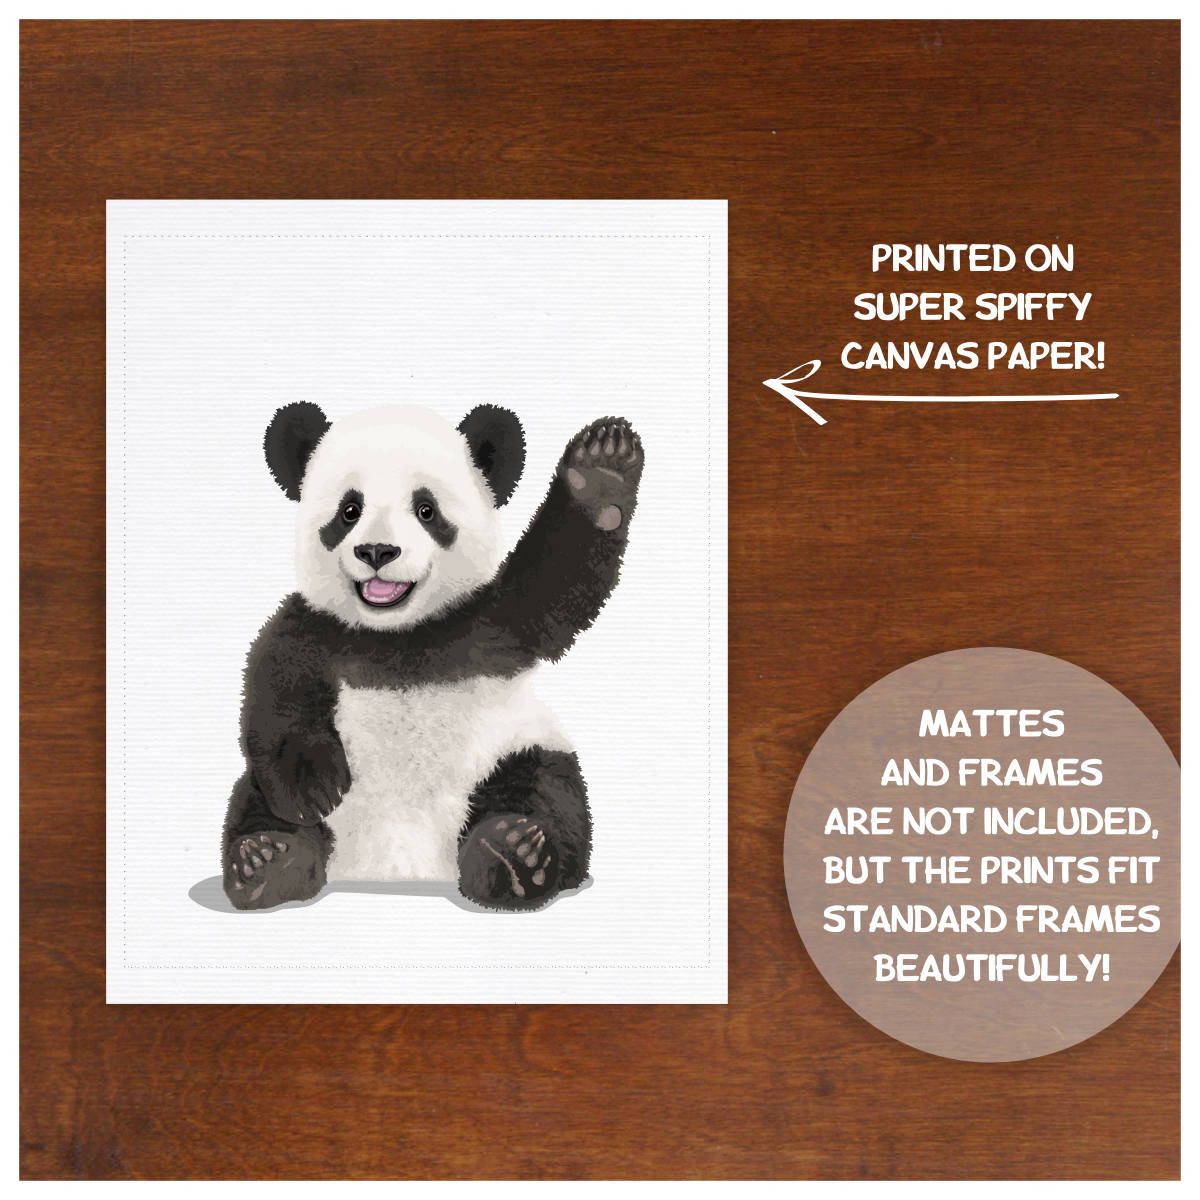 Baby Made Panda, Baby Panda and Sun from Plasticine, Colorful Modeling Clay  and Sculpting Funny Animals . Home Education Game Stock Image - Image of  love, child: 228023993